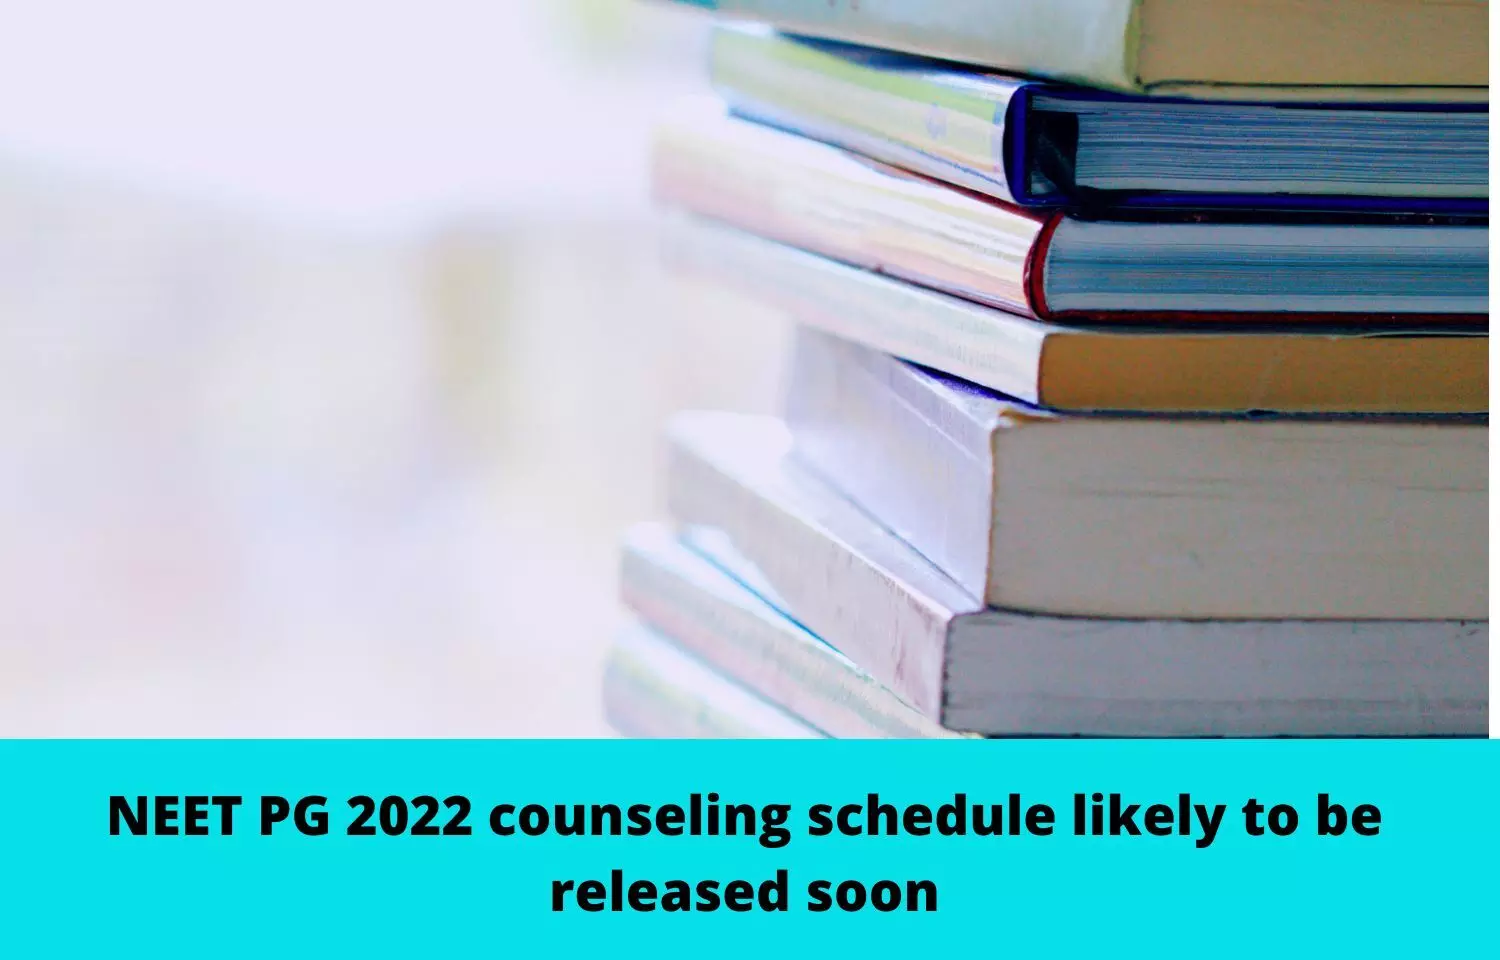 NEET PG 2022 counseling schedule likely to be released soon